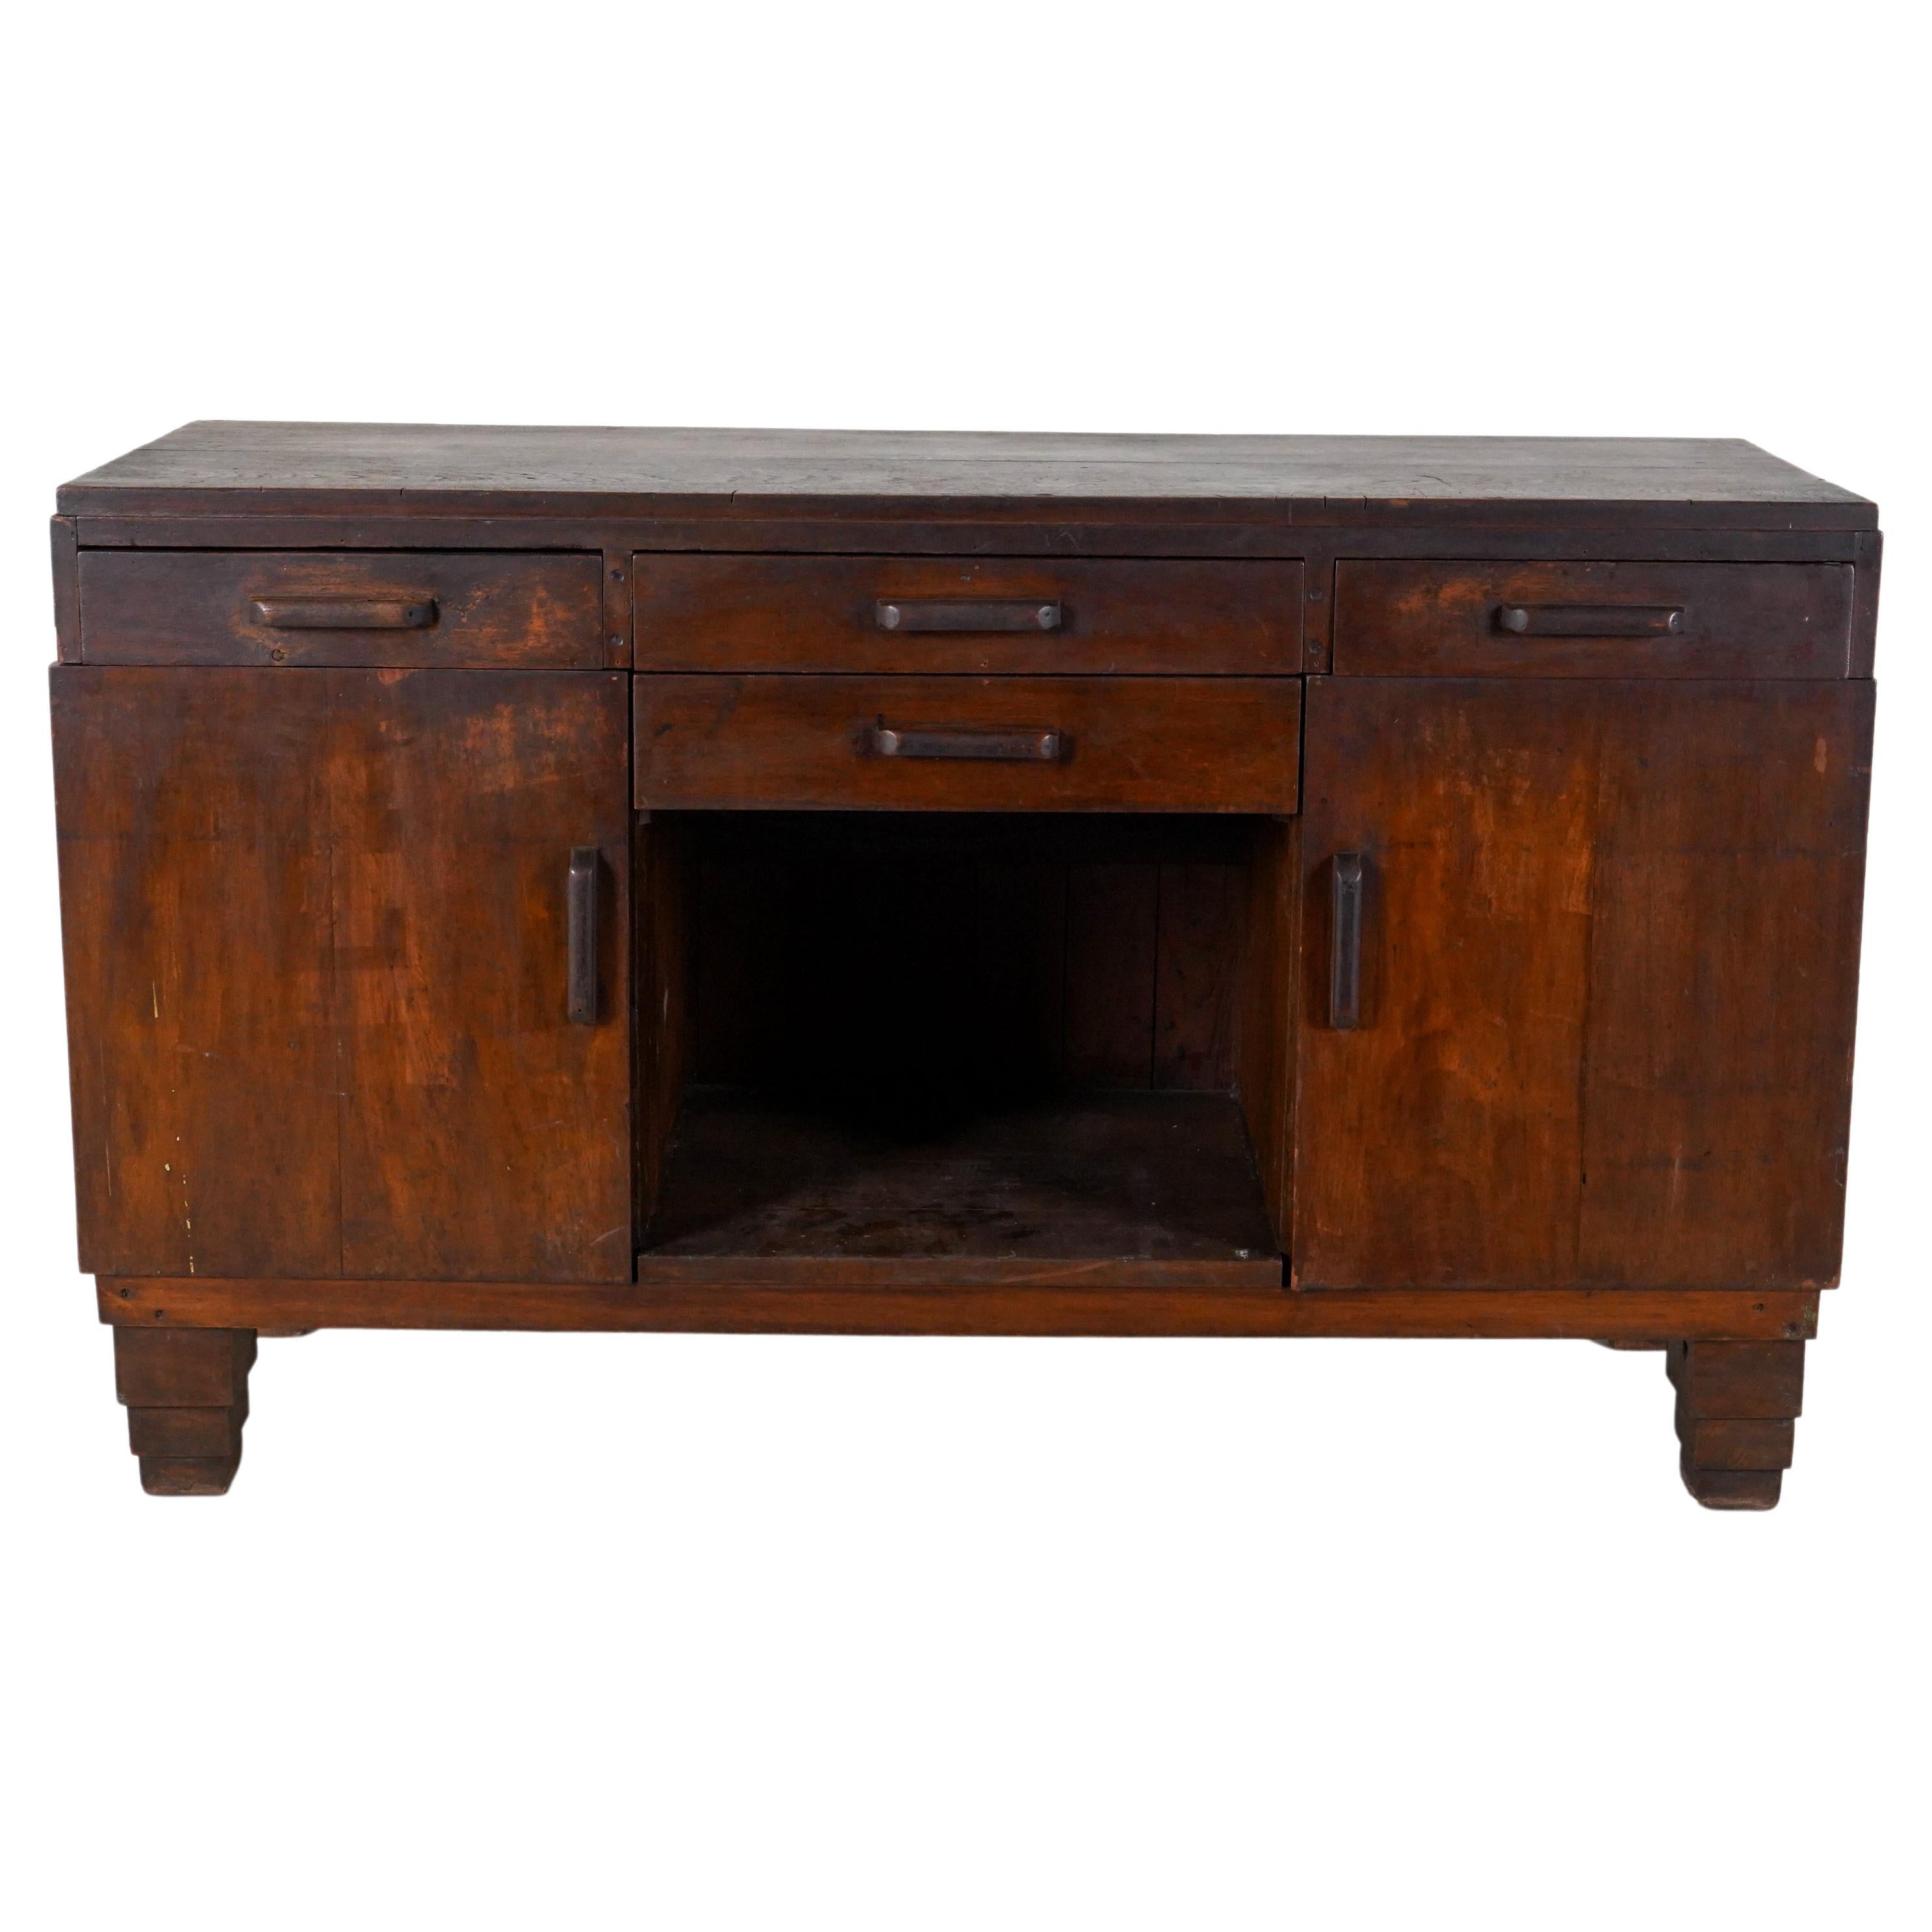 A British Colonial Teak Wood Shop Counter For Sale